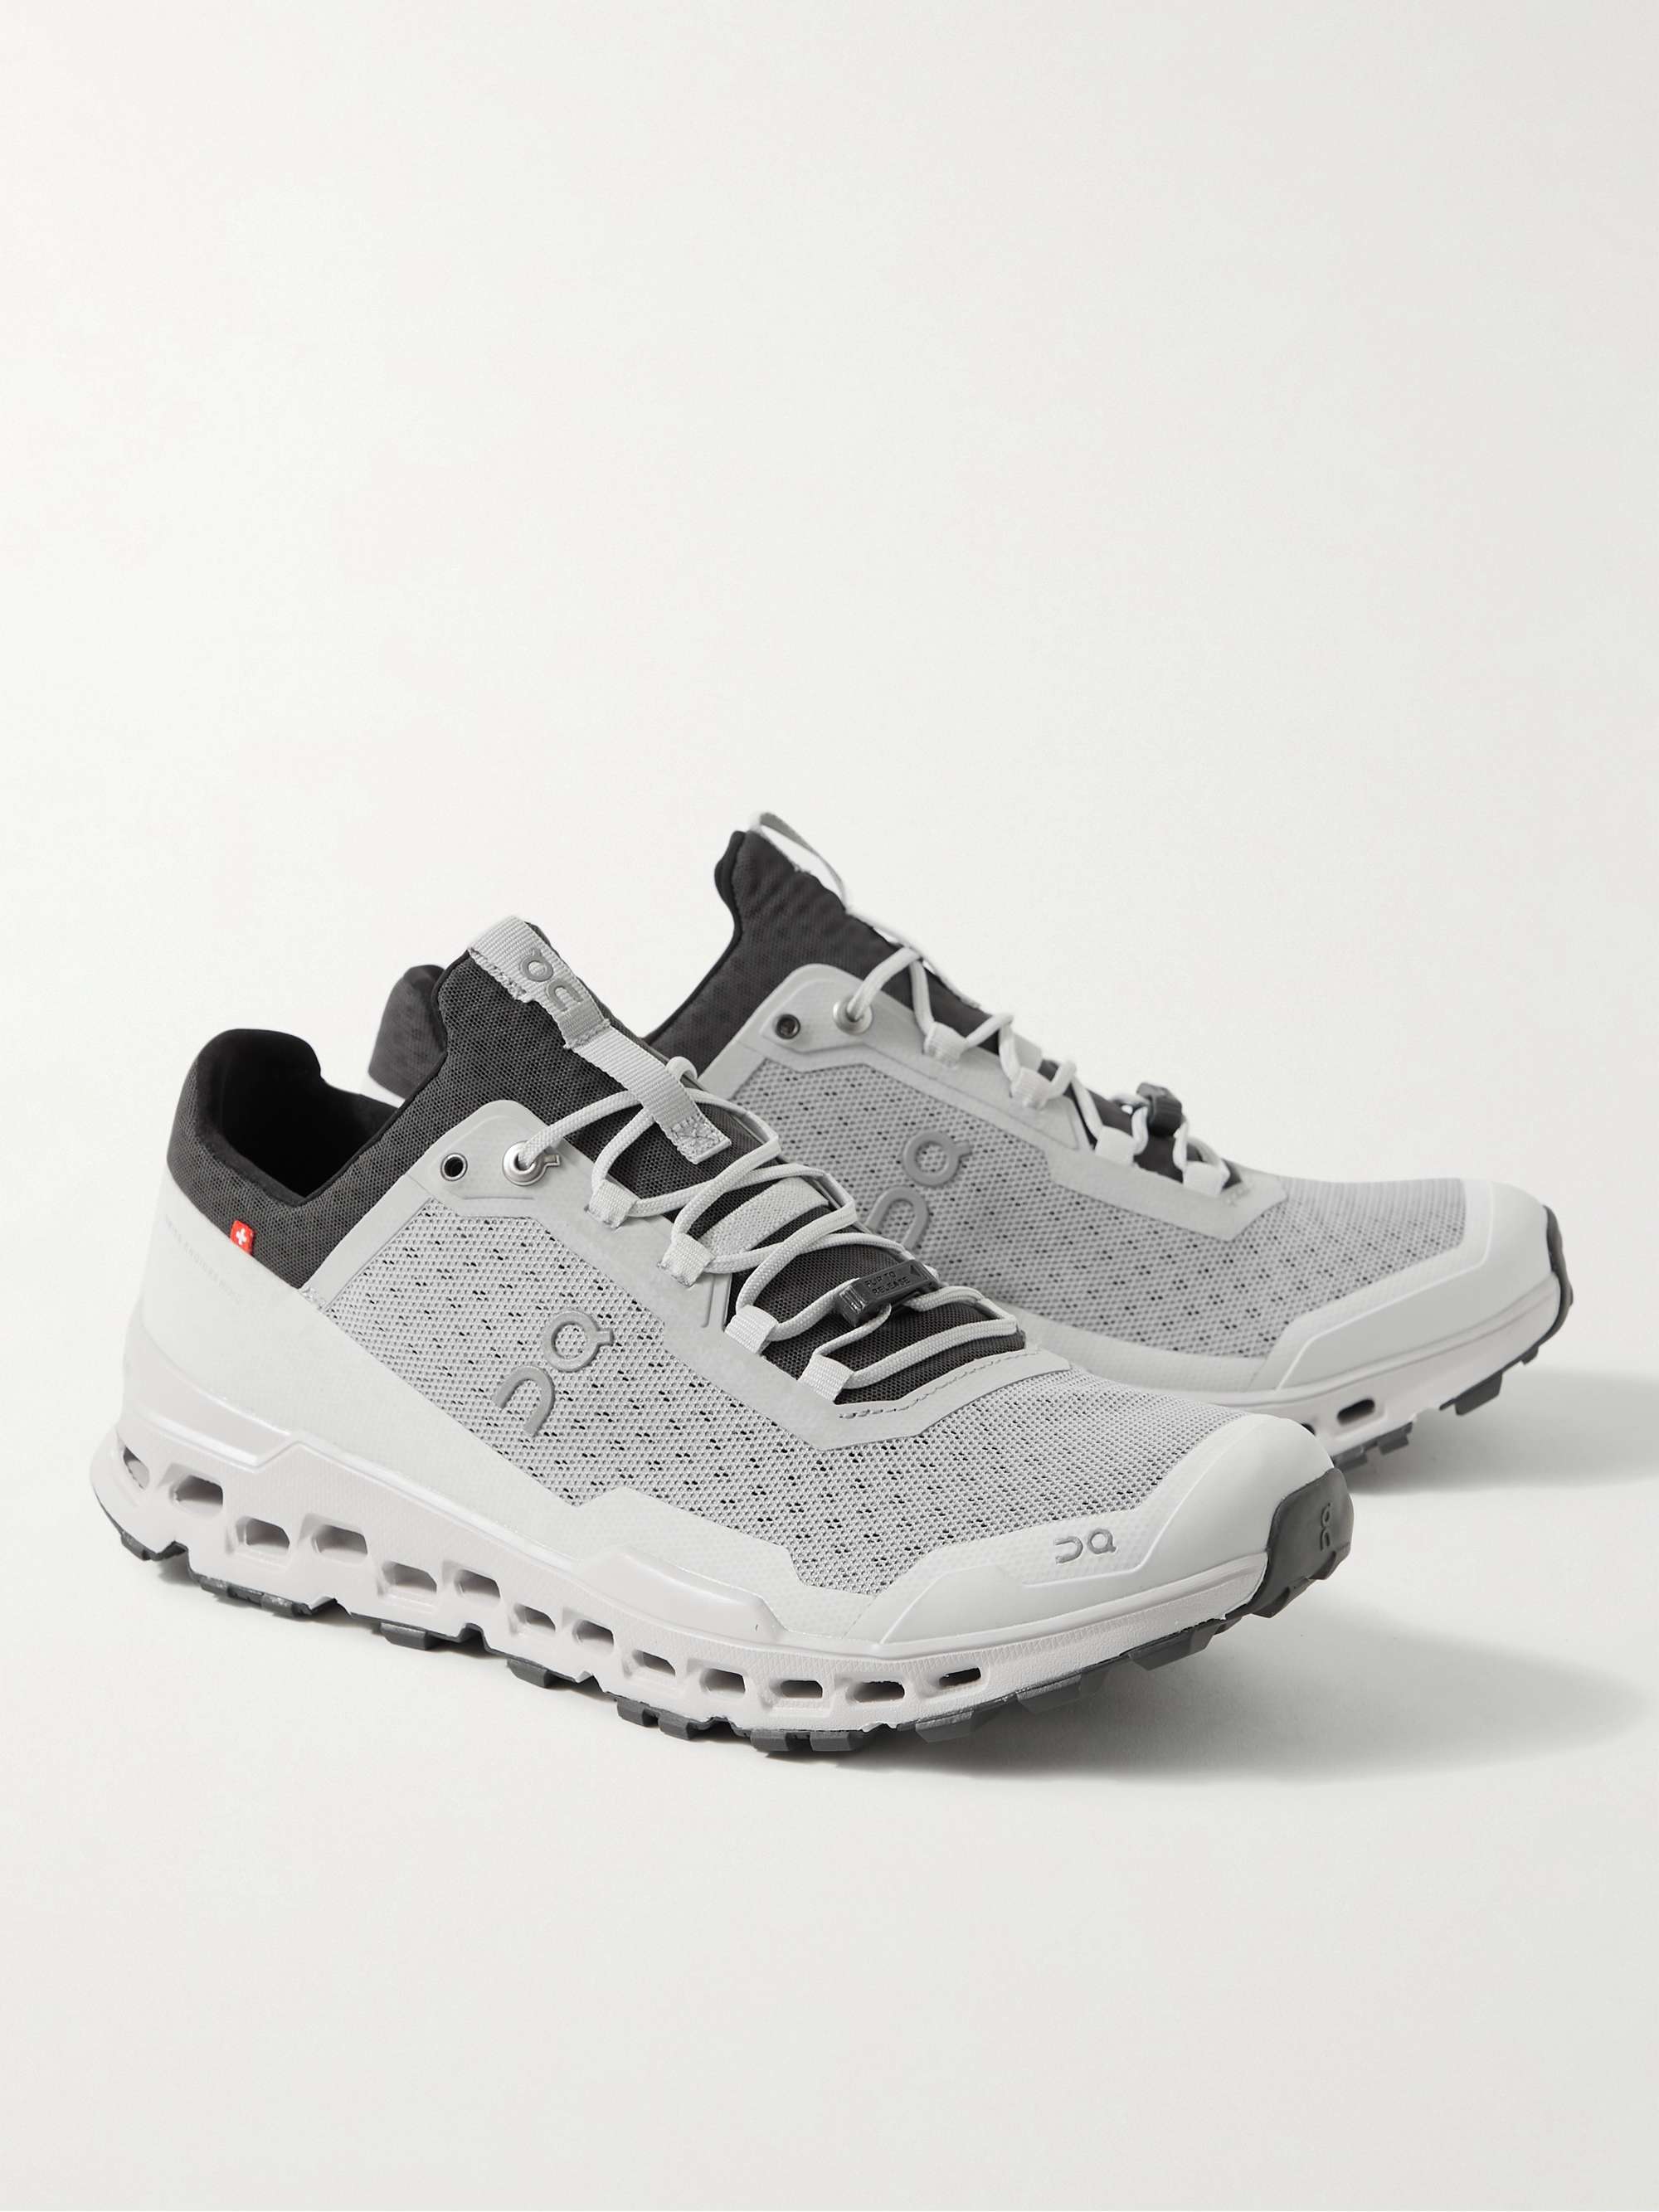 ON-RUNNING Cloudultra Rubber-Trimmed Mesh Trail Running Sneakers